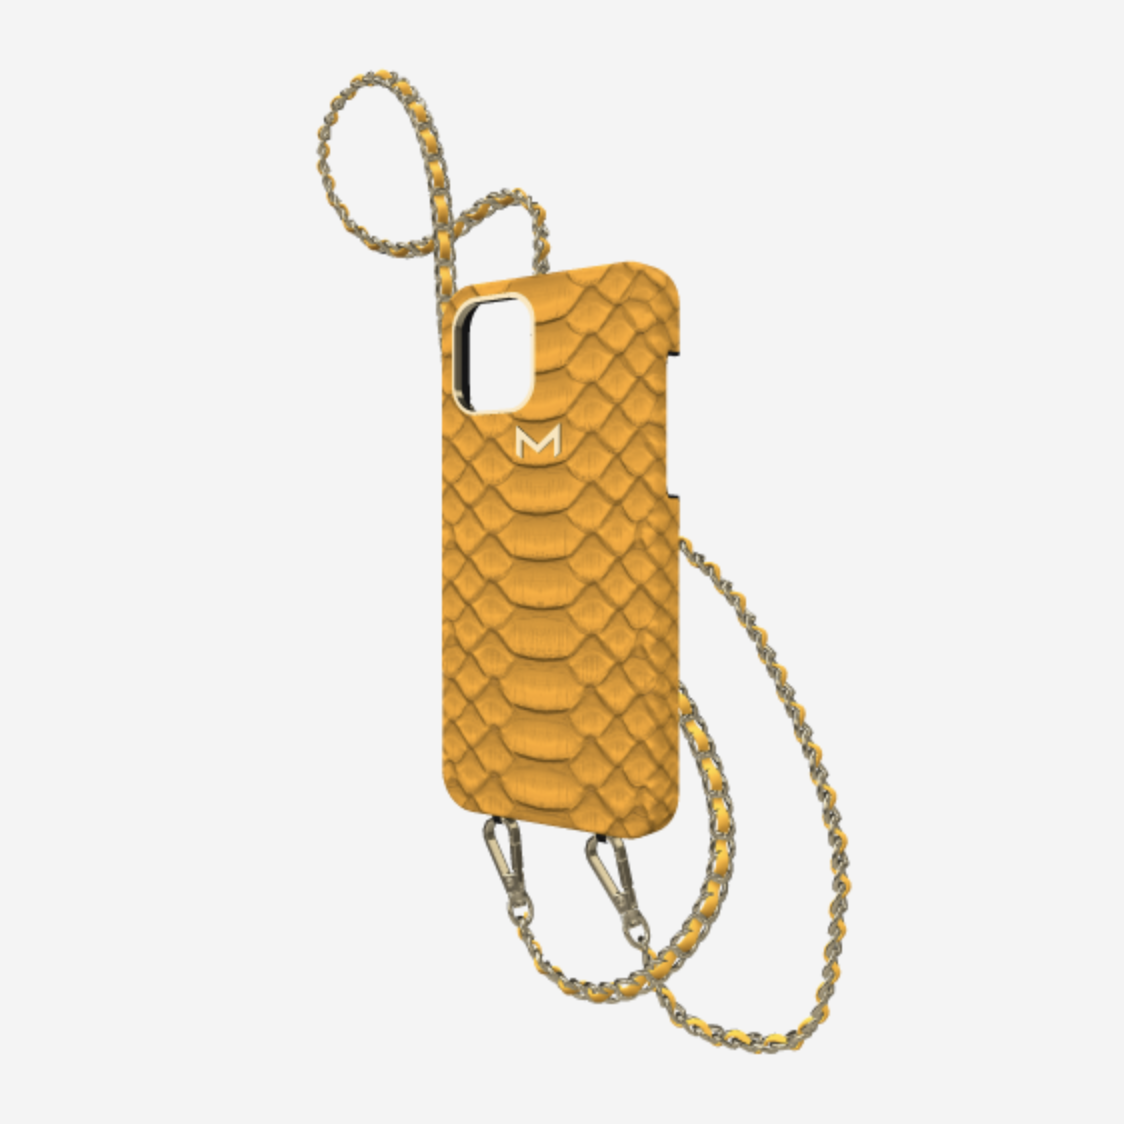 Necklace Case for iPhone 12 Pro Max in Genuine Python Sunny Yellow Yellow Gold 